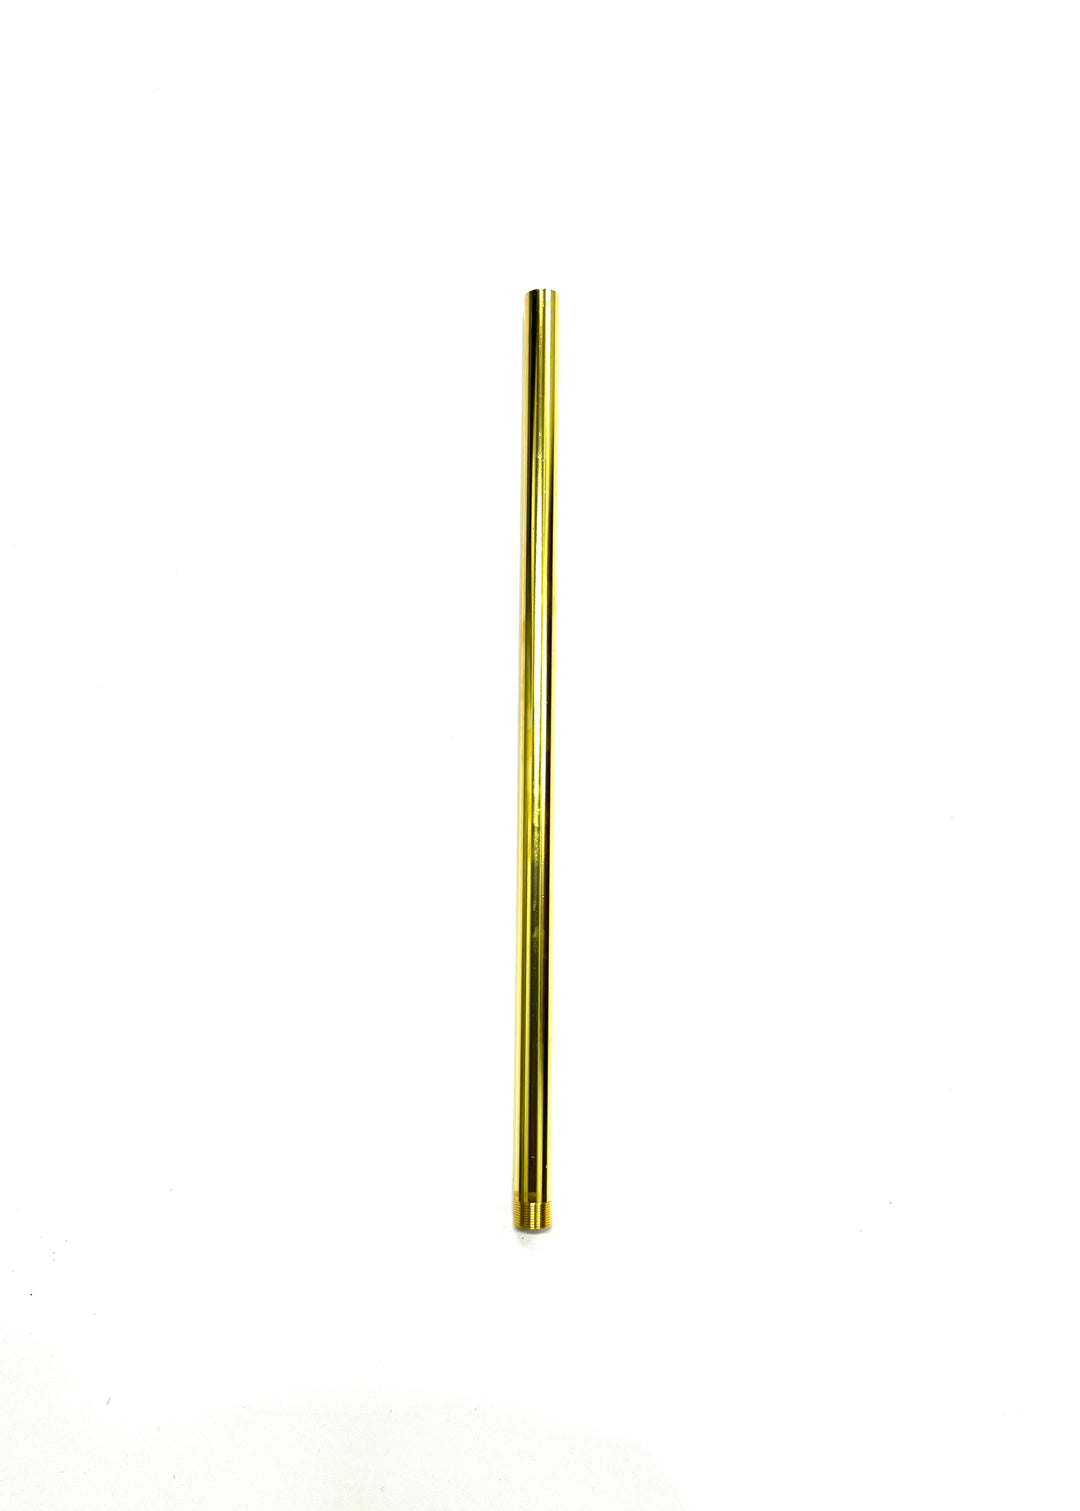 ACCESS: Brass Barrel for Worker Harrier in 350mm, 400mm and 500mm